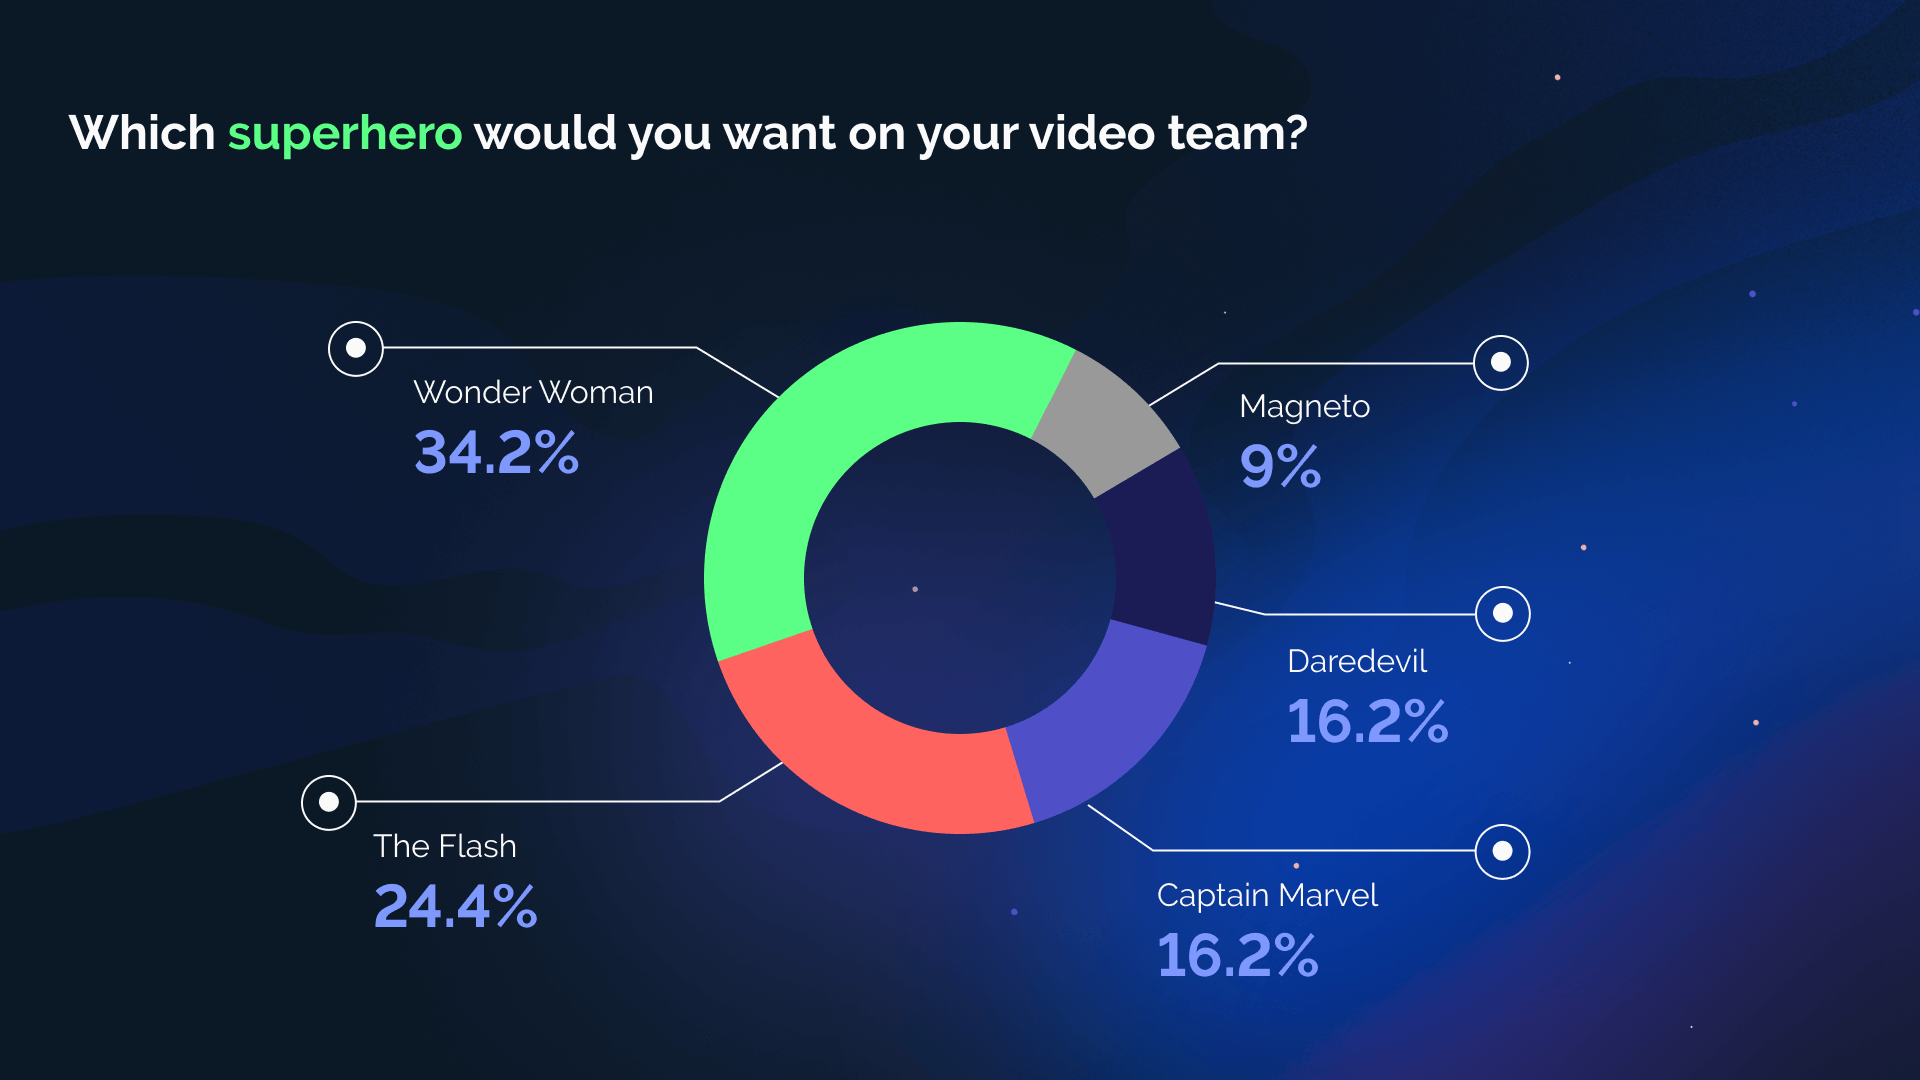 Which superhero would you want on your video team?